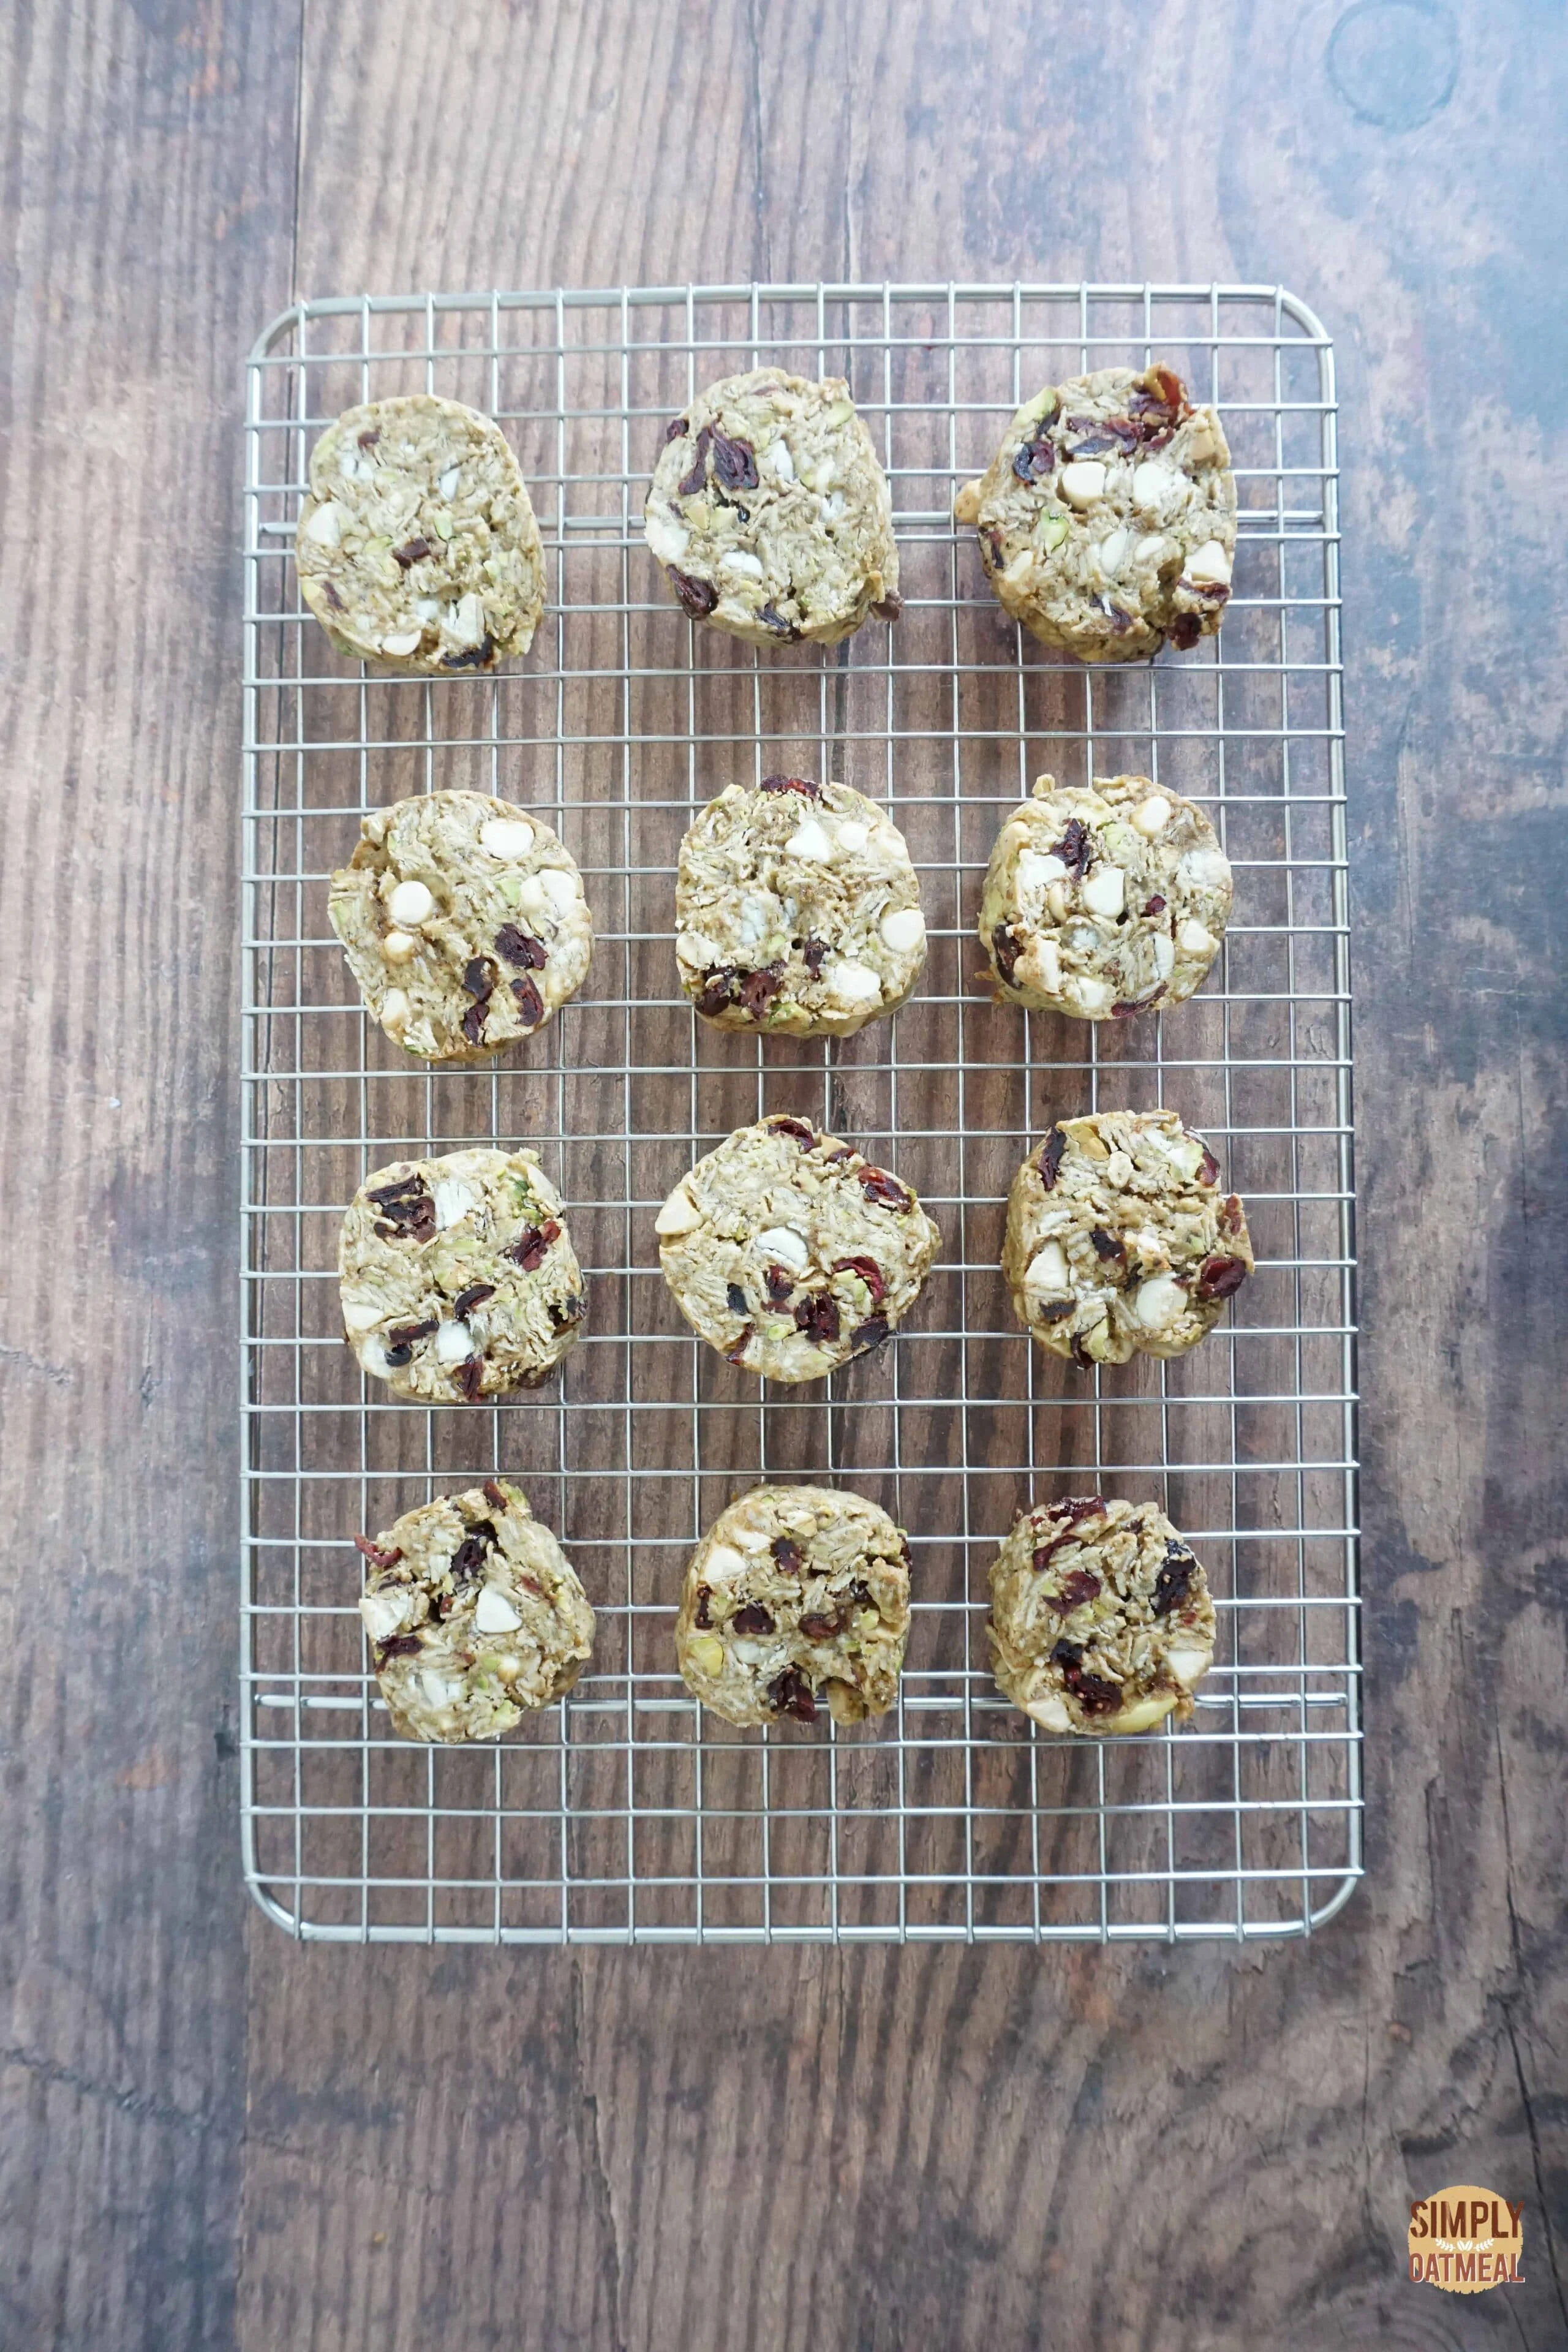 Fresh baked white chocolate cherry oatmeal cookies on a wire rack